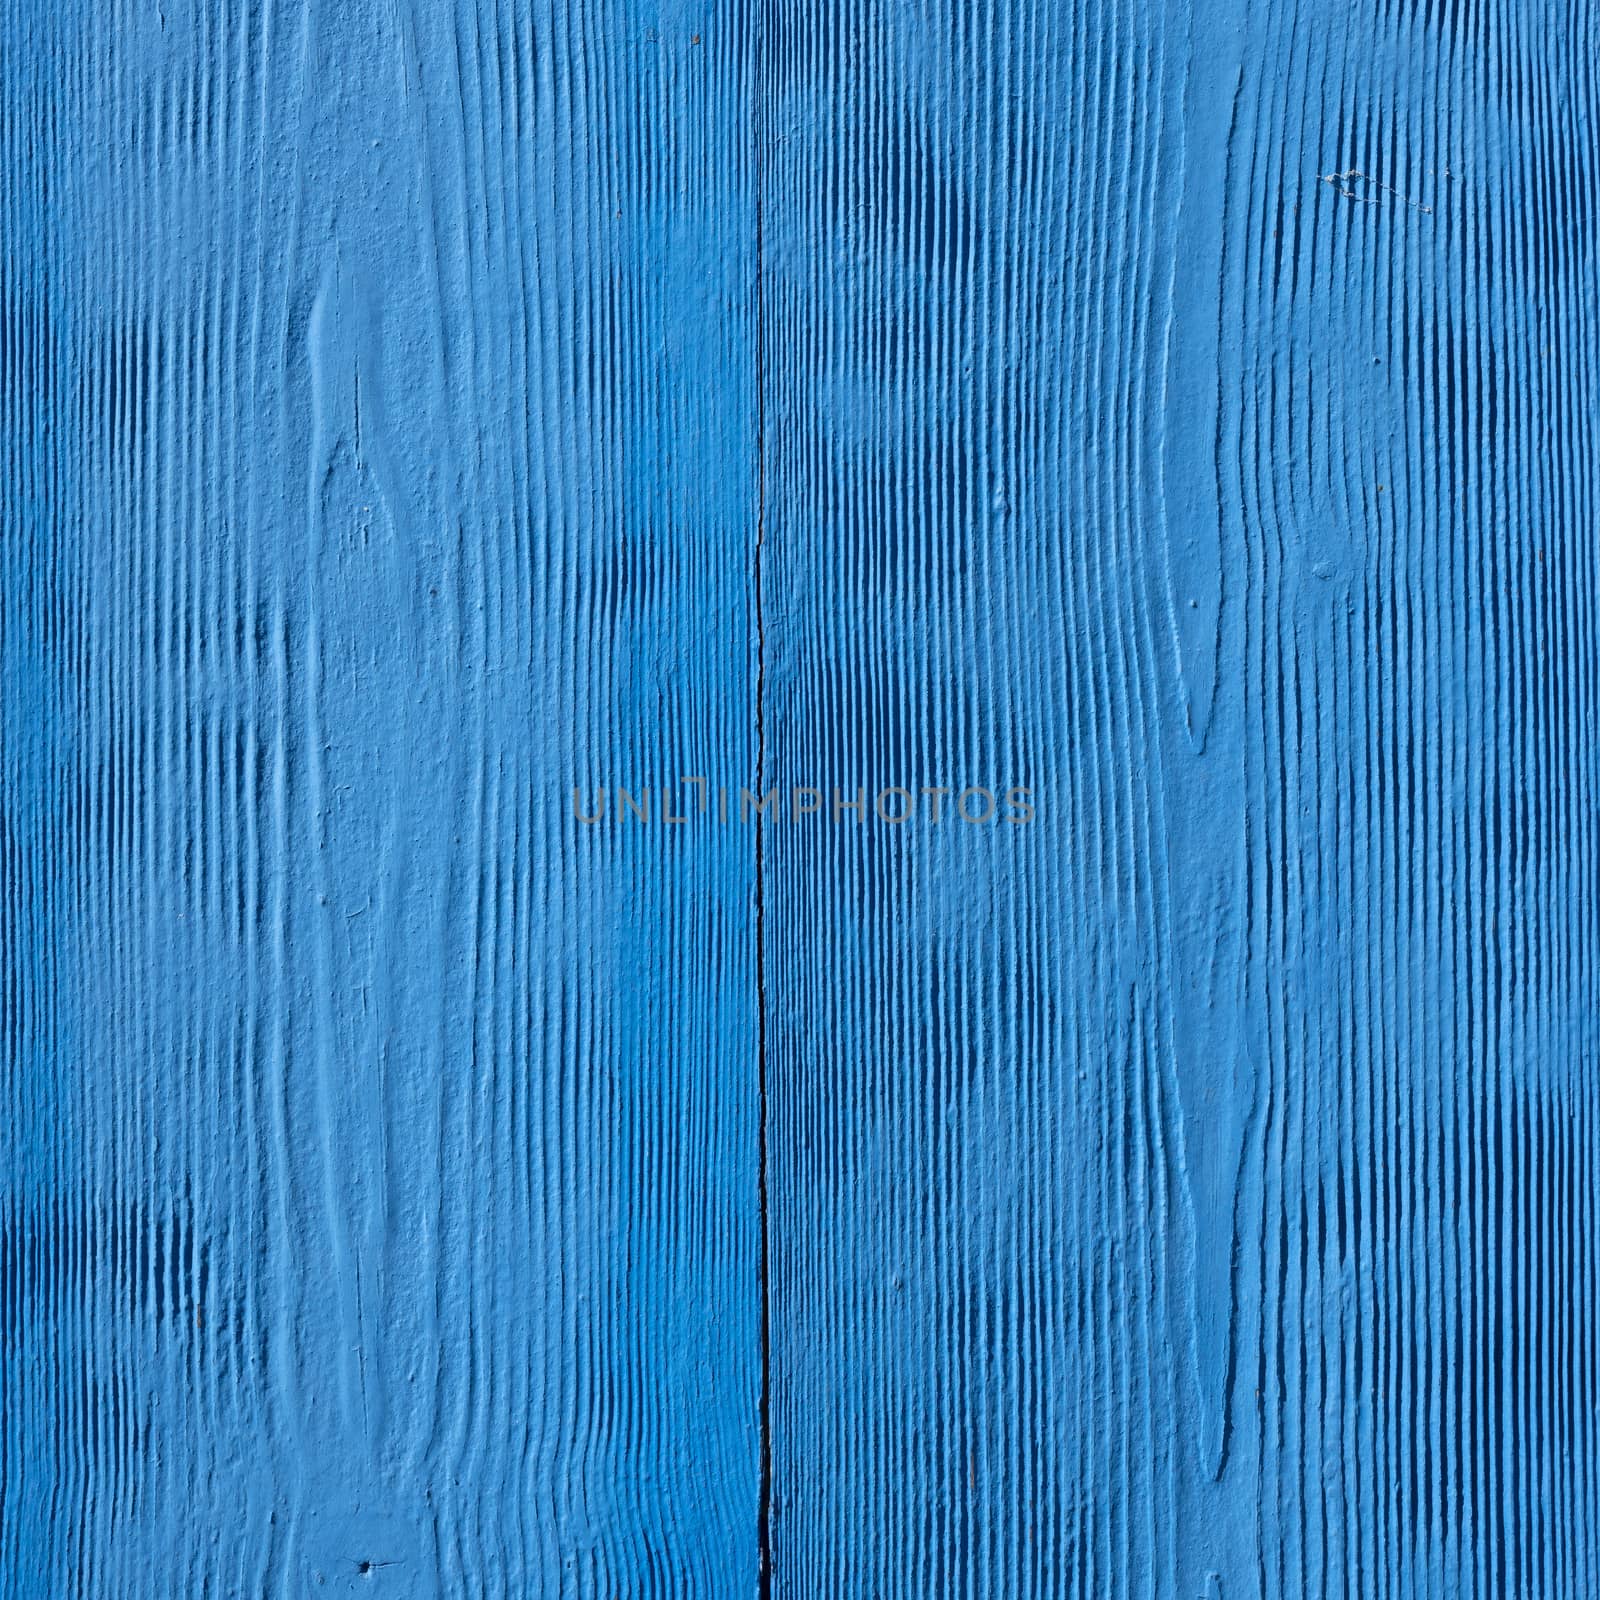 texture of old wood with bright fresh blue paint by ahavelaar